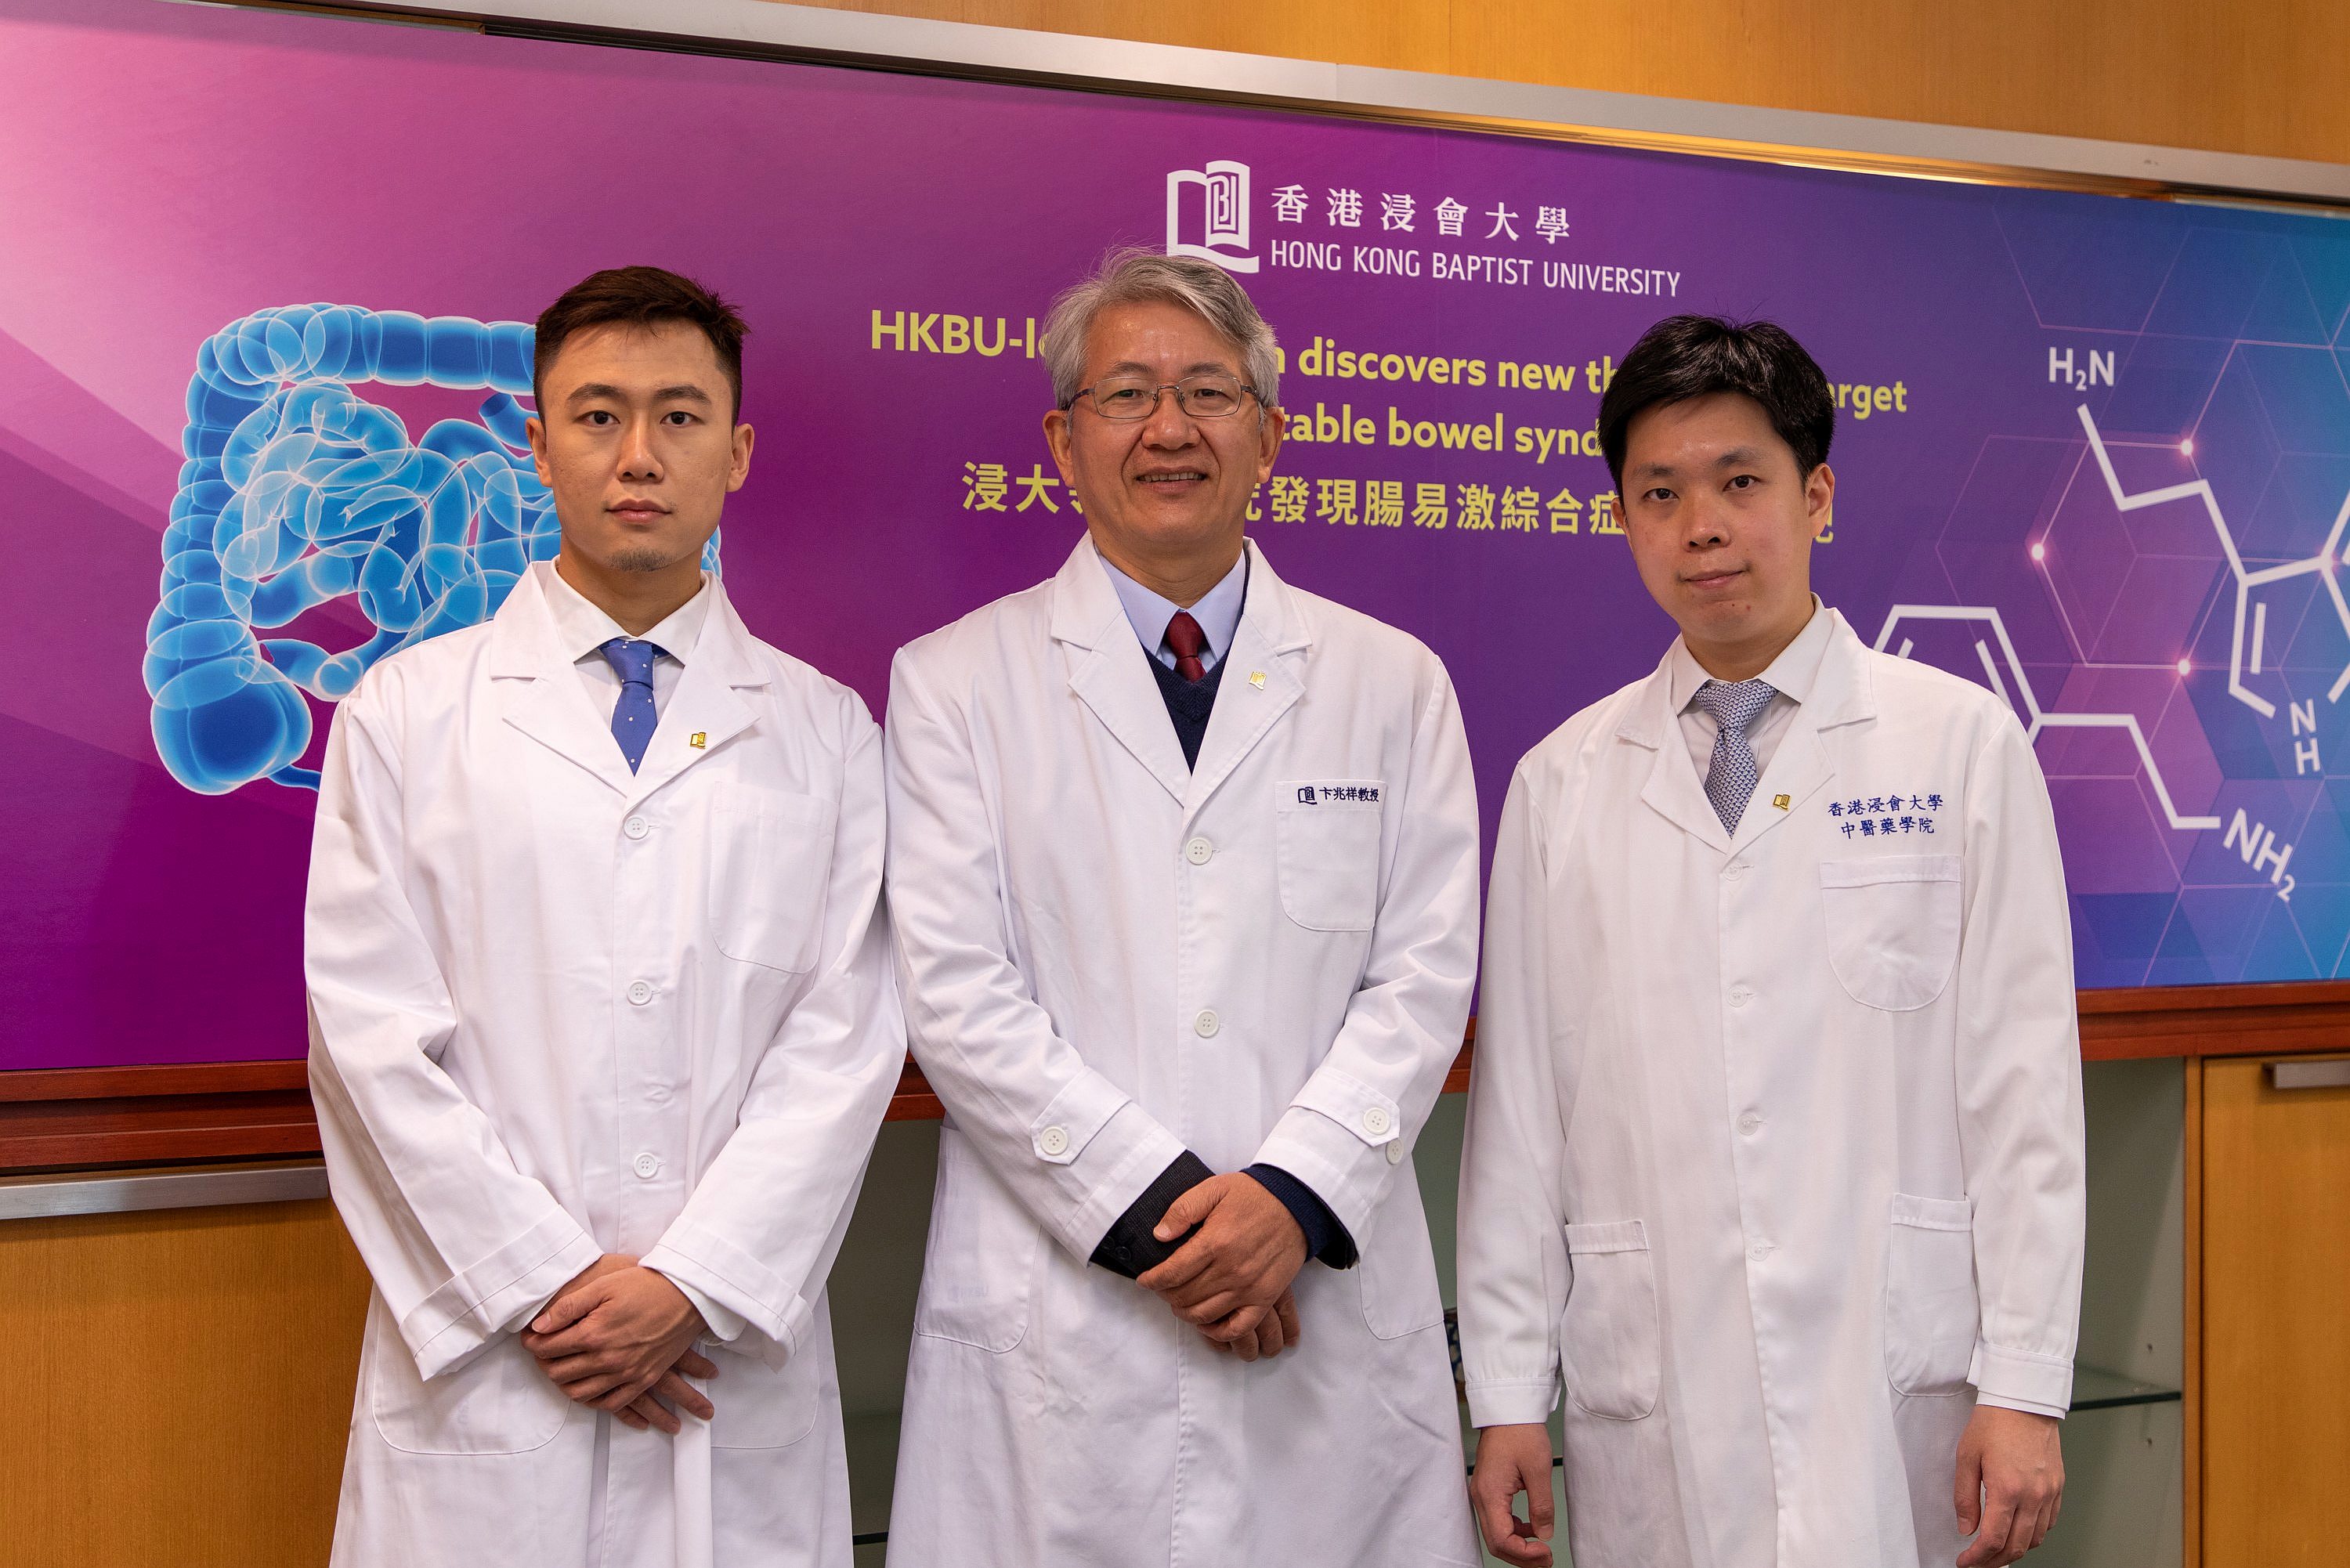 Hong Hong Baptist University-led research discovers new therapeutic target for irritable bowel syndrome